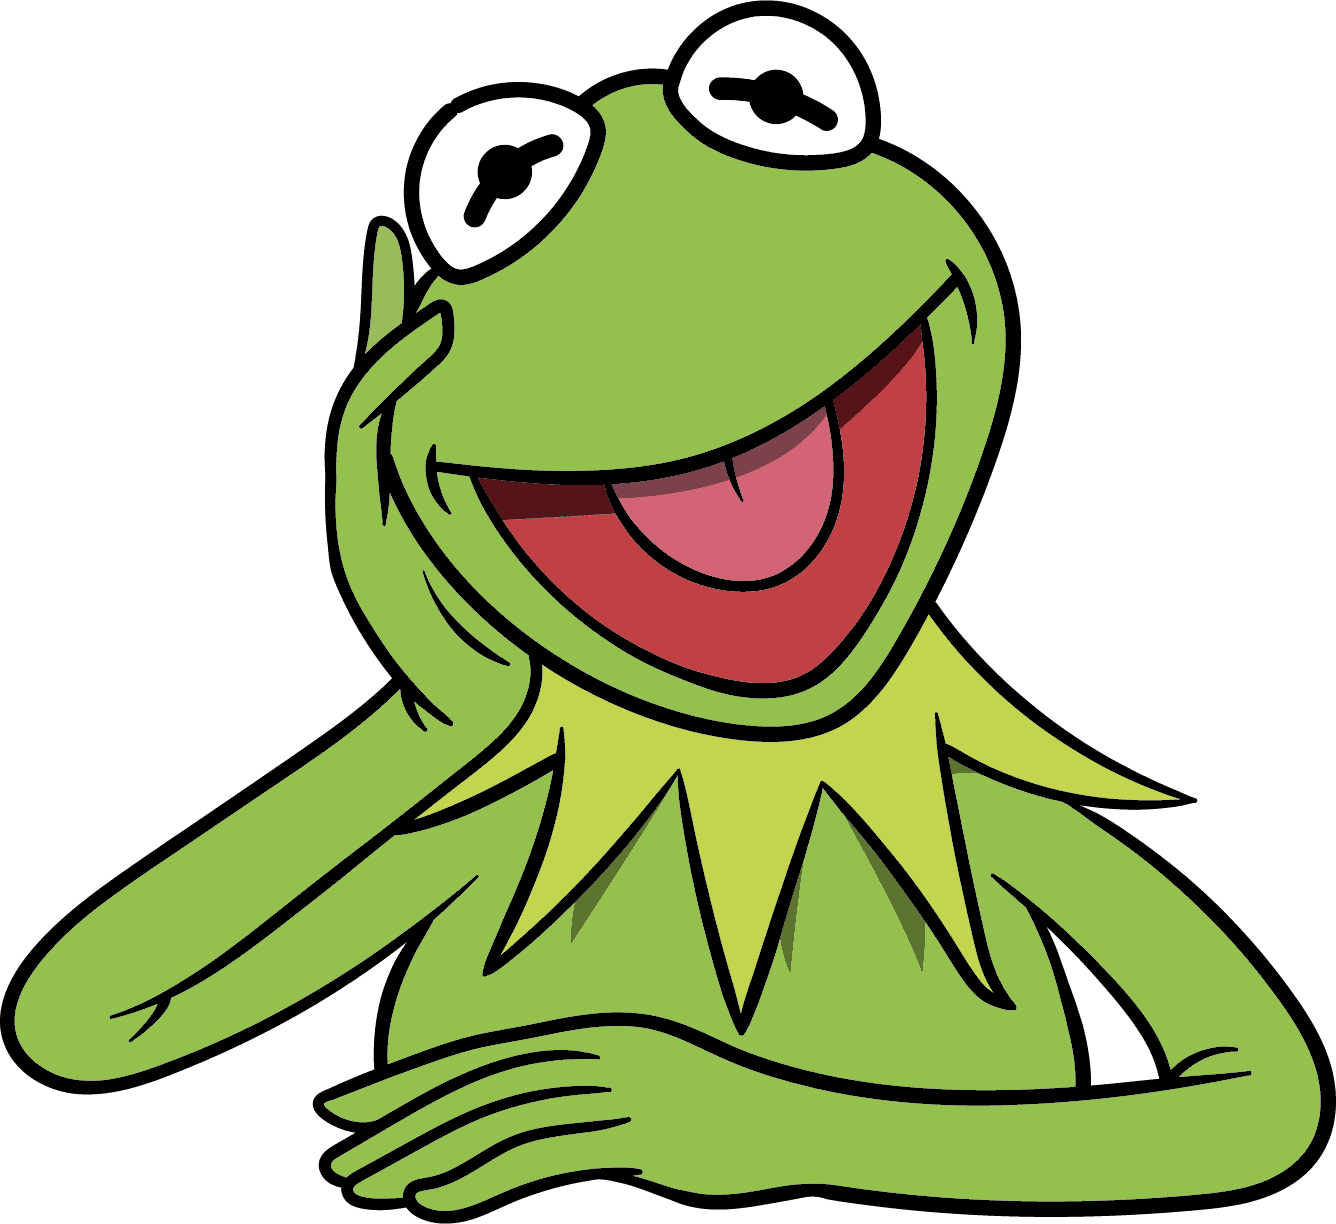 Kermit  Vinyl Decal Car Window  You Pick The Size & Color Frog 